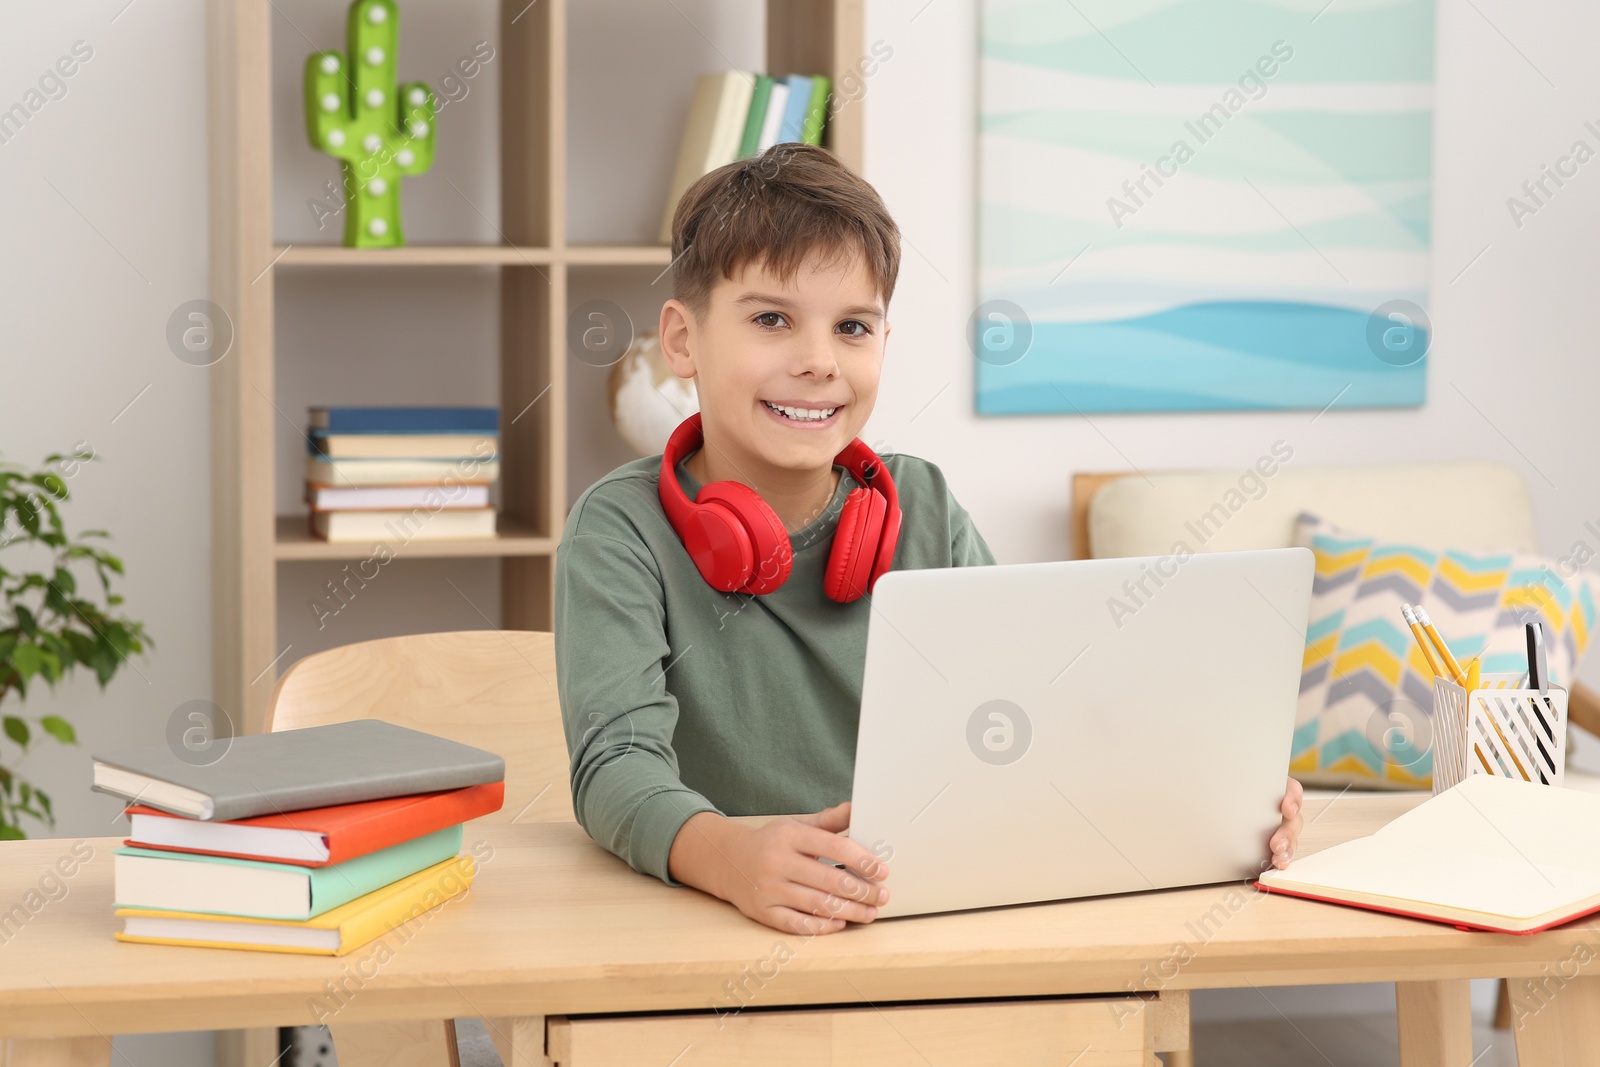 Photo of Boy with red headphones using laptop at desk in room. Home workplace